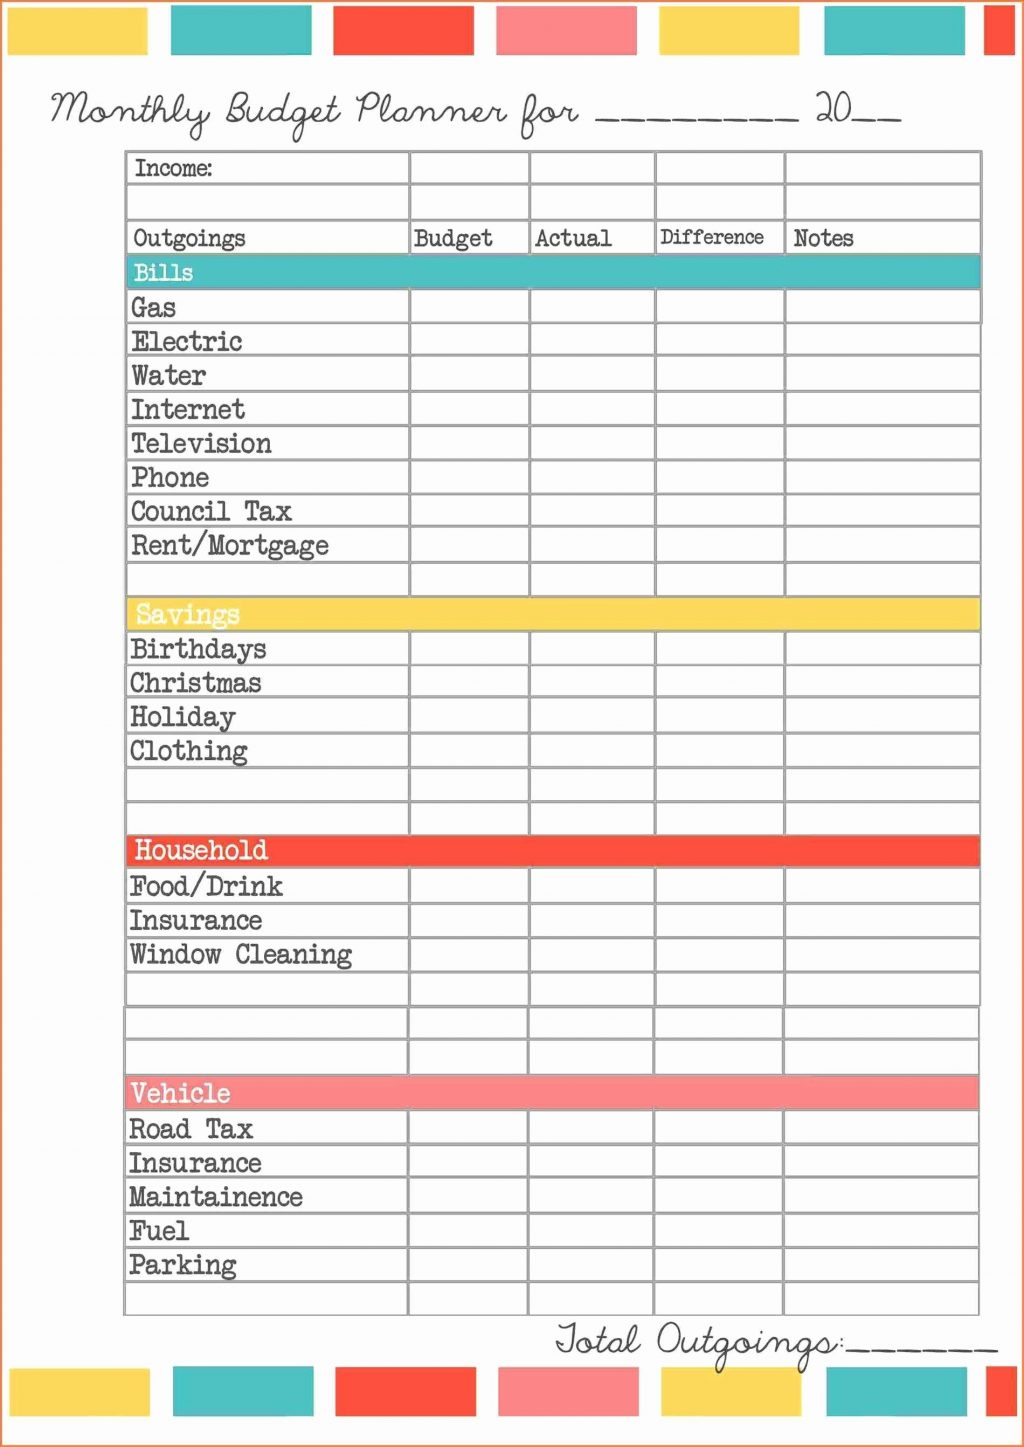 Accounting Spreadsheet Templates For Small Business Free Downloads In Accounting Spreadsheet Templates For Small Business